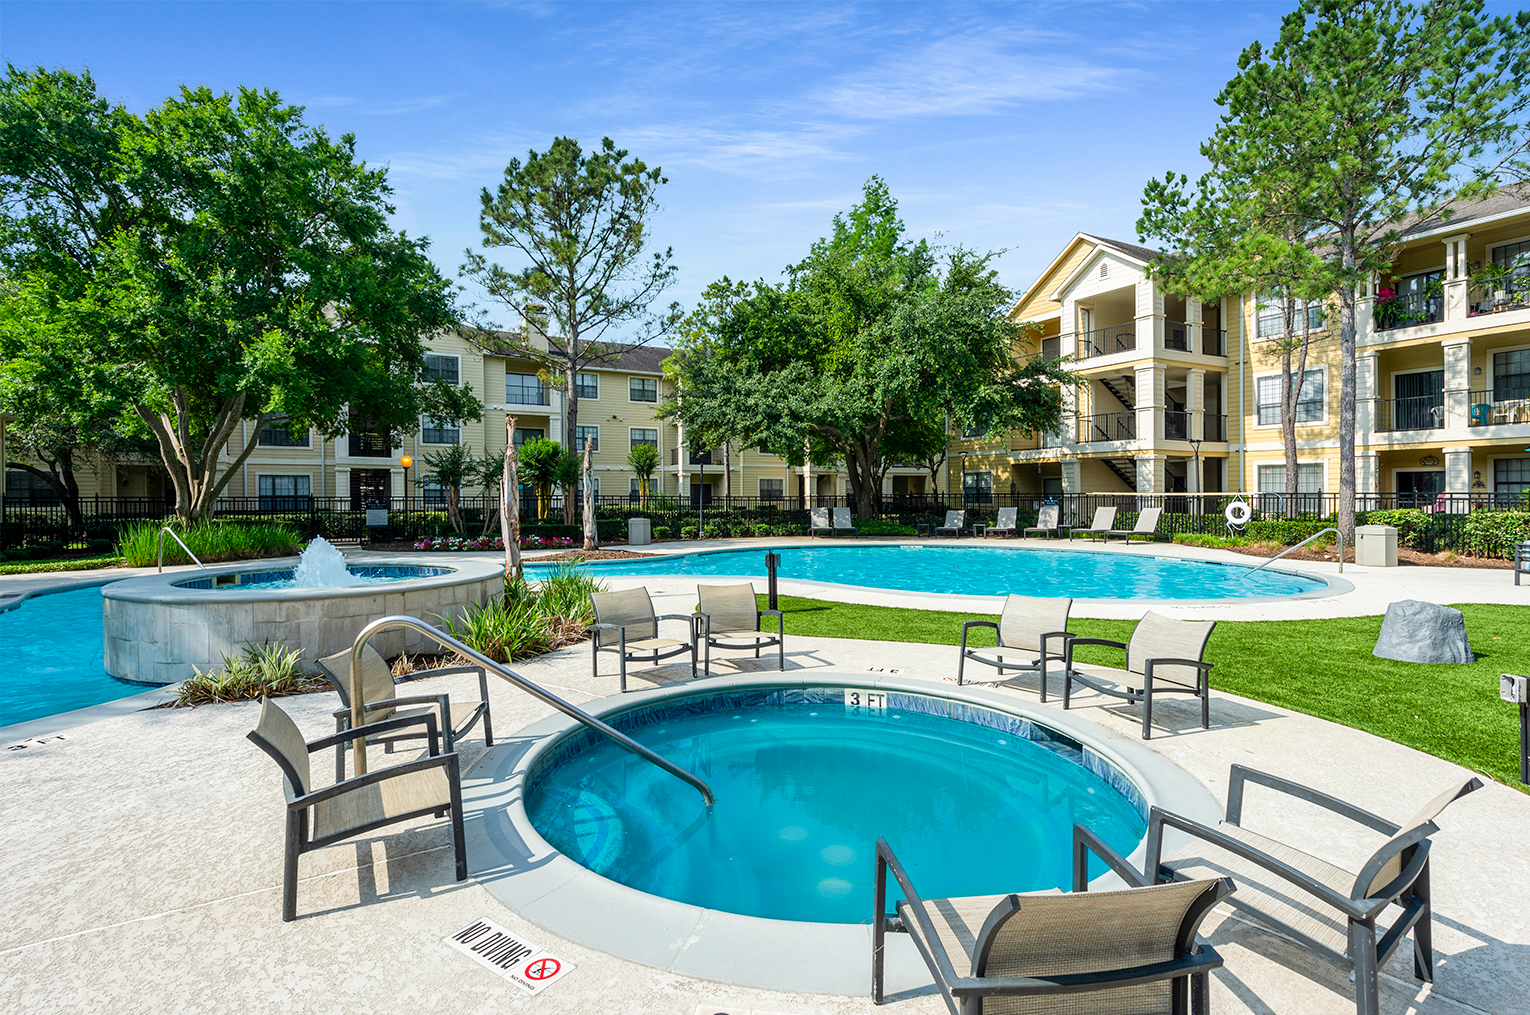 Apartment Building Exterior with Pool Deck and Seating